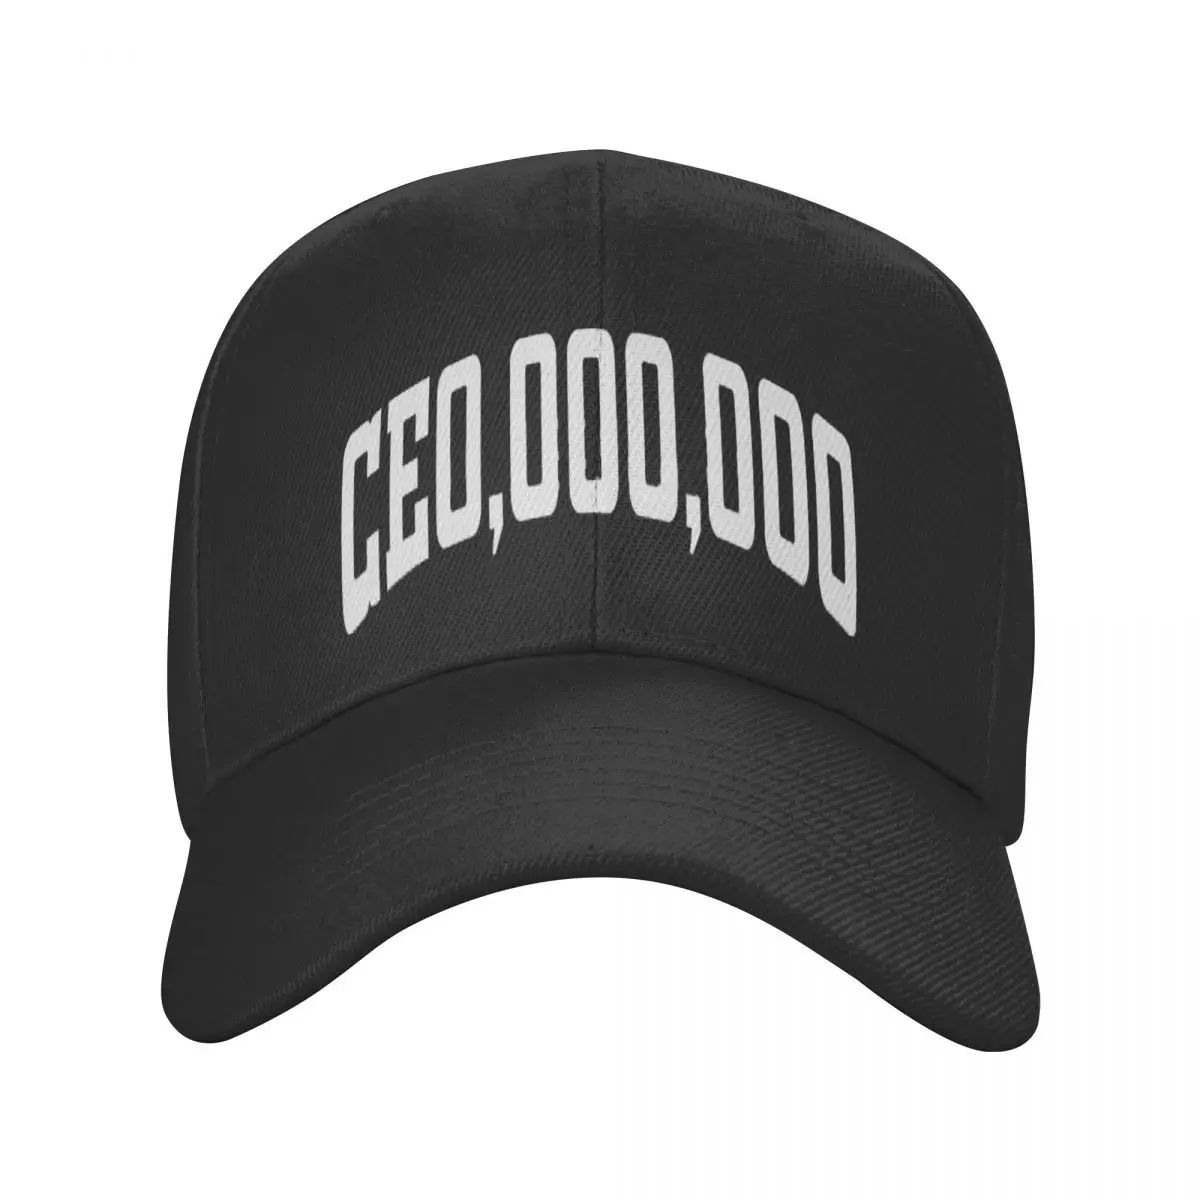 

Funny Ceo CEO,000,000 Casquette, Polyester Cap Personalized Unisex Travel Nice Gift